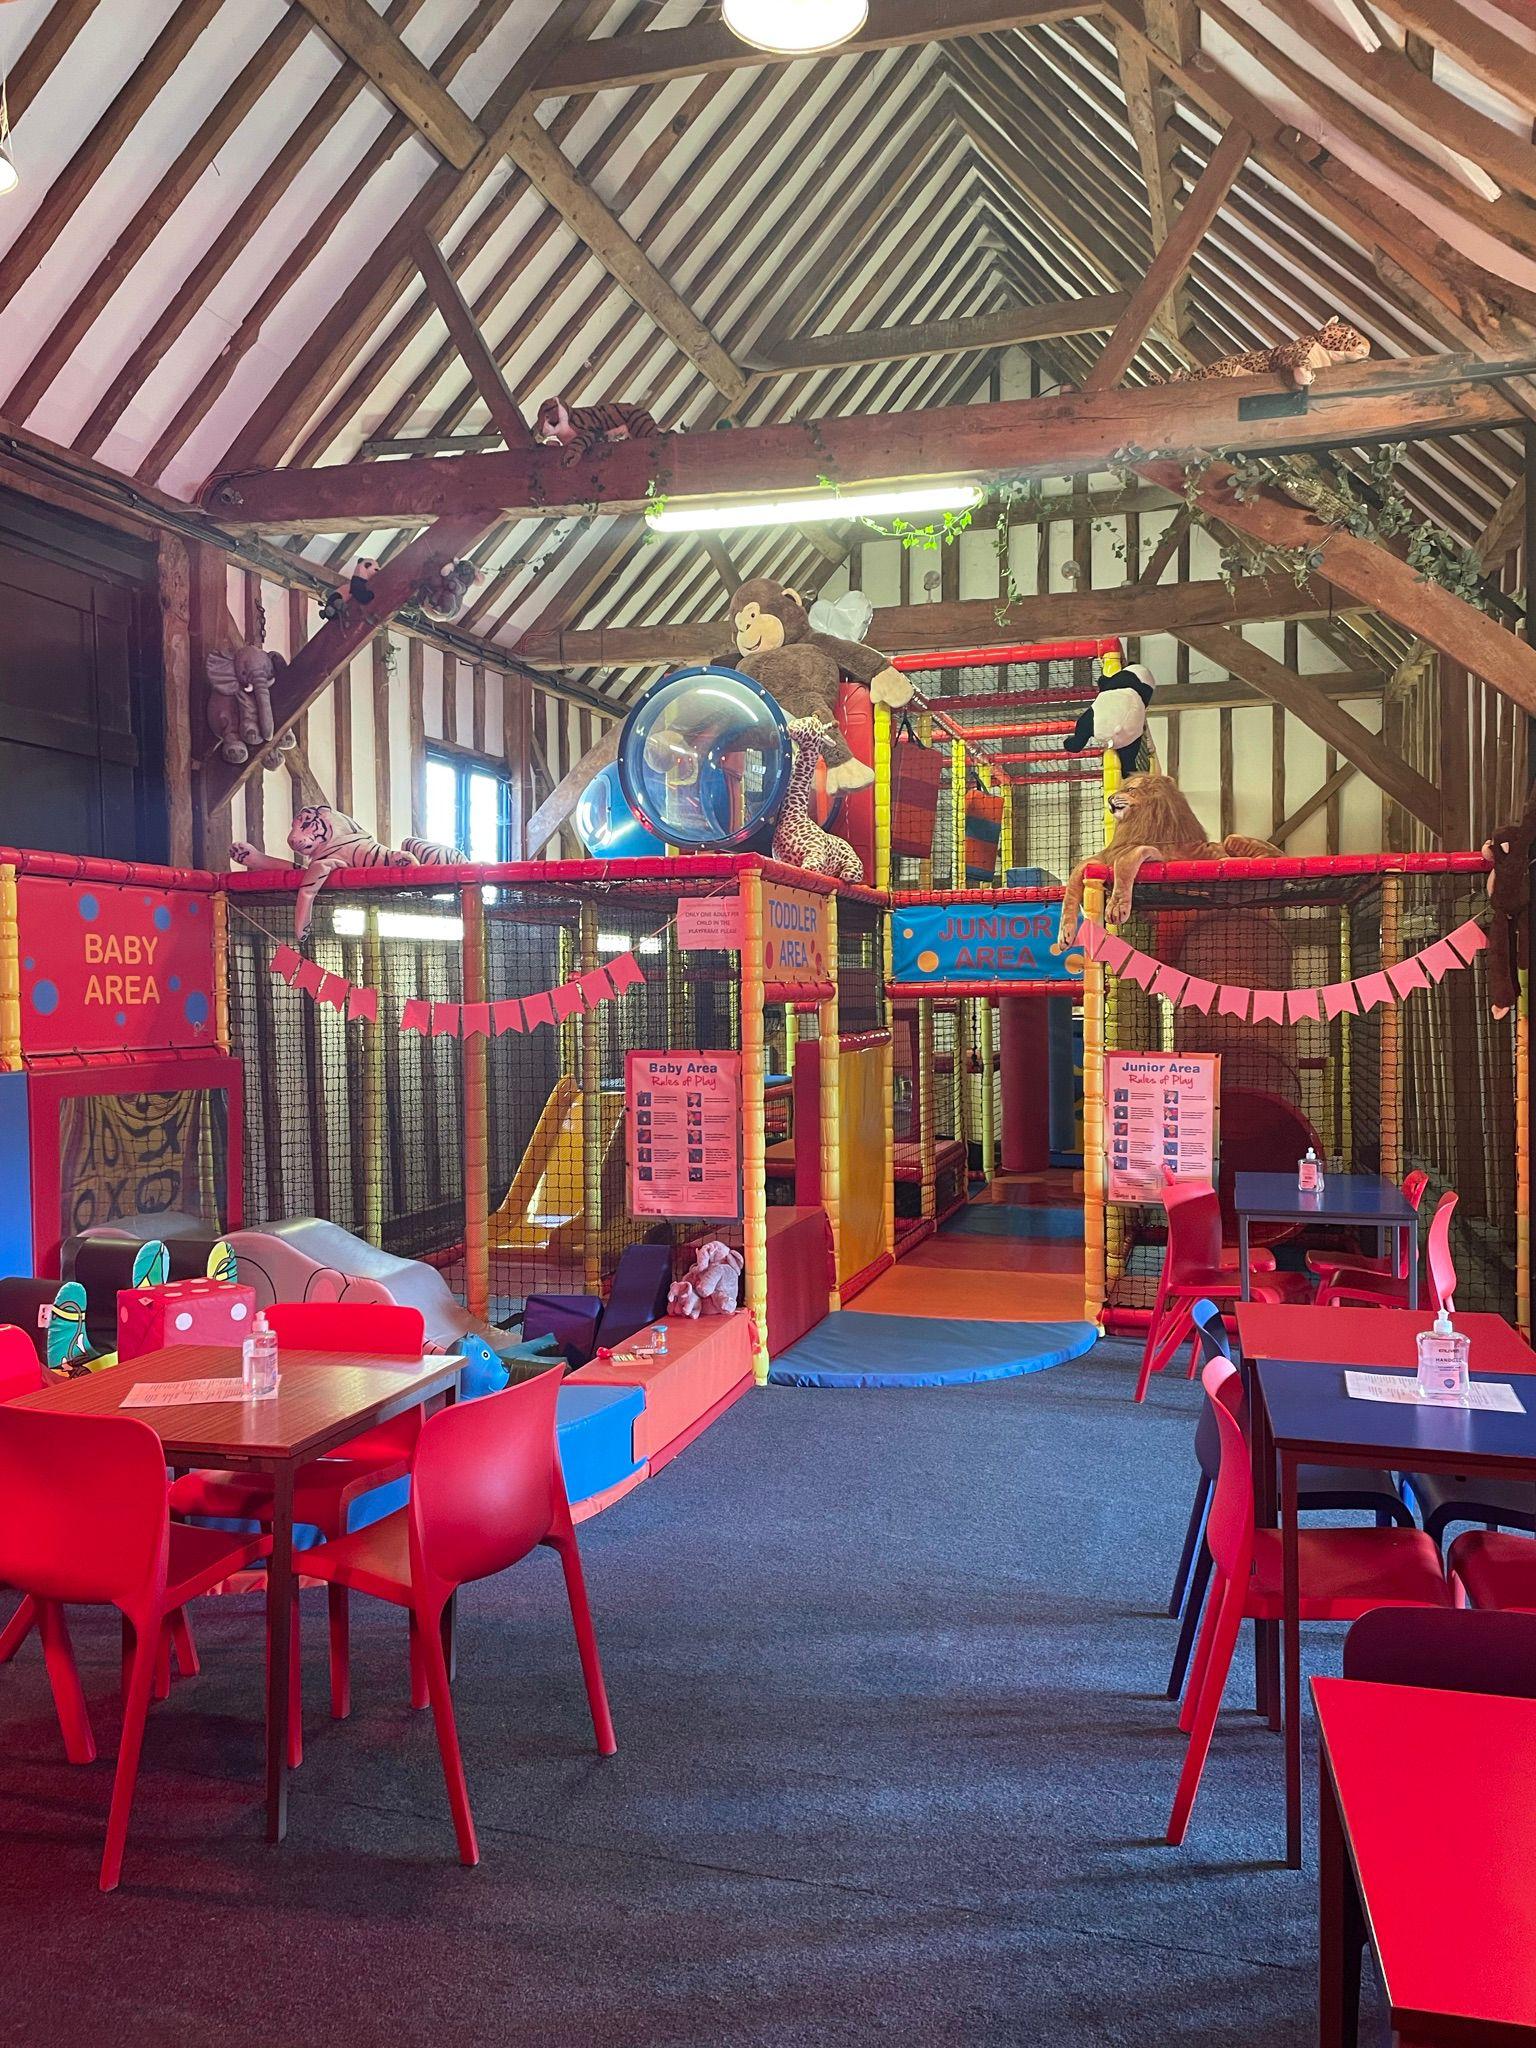 Tots world cafe seating area